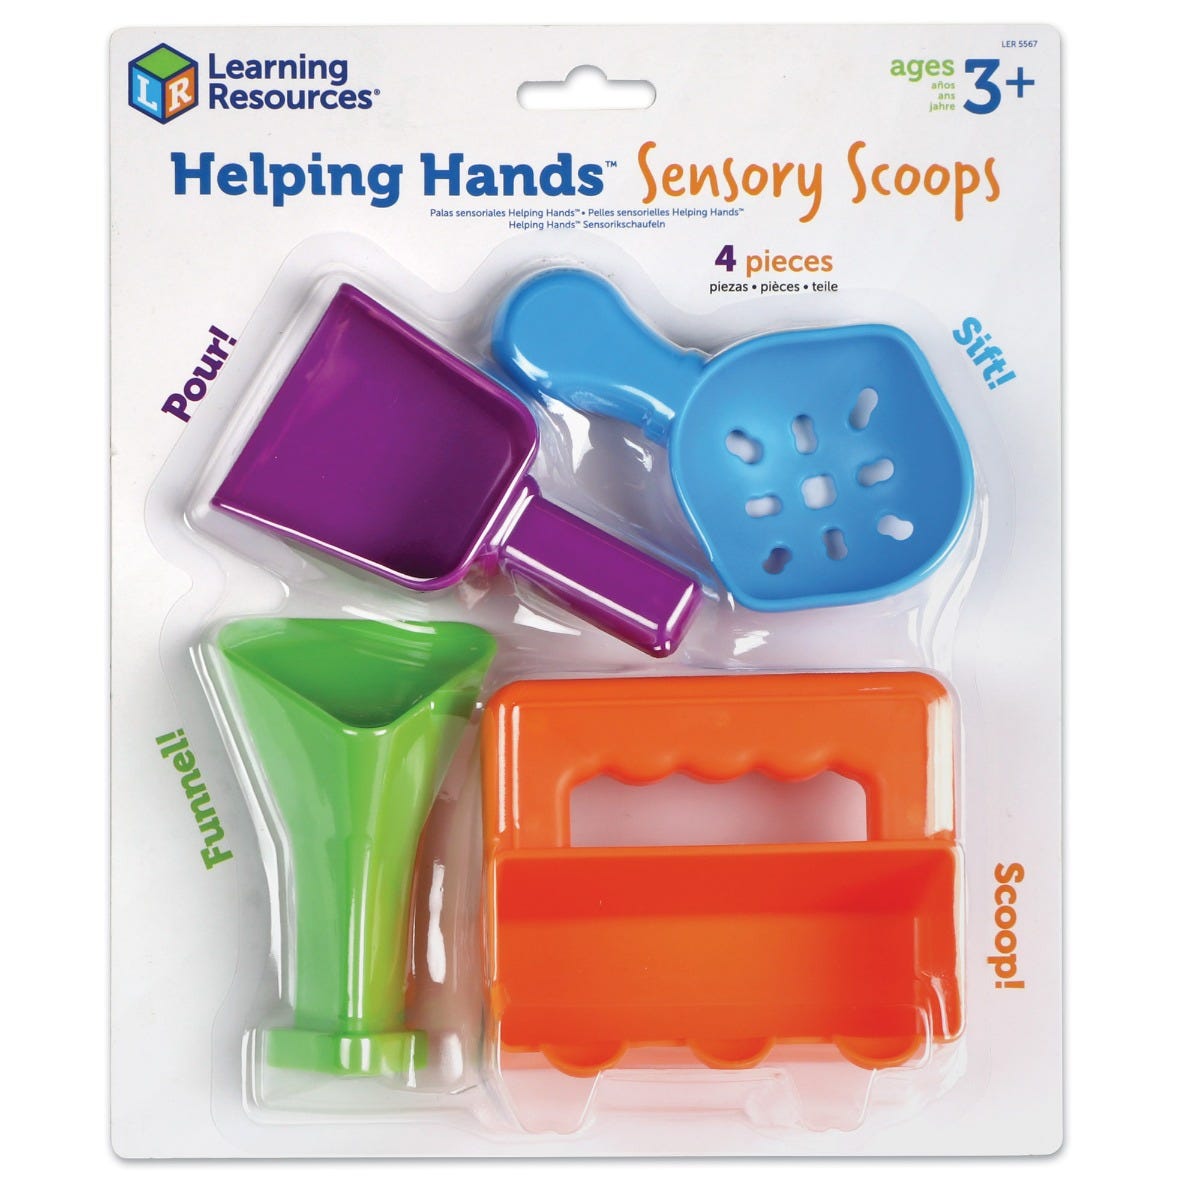 Helping Hands Sensory Scoops, Little ones pour, sift, funnel, and scoop their way to fine motor skills with this set of colourful Helping Hands Sensory Scoops. Sized just right for little hands, the 4 fun fine motor tools in this set each come with a unique way to scoop: children can rotate and sift; funnel and stamp; twist and pour; or practise a whole-hand scooping motion. The Helping Hands Sensory Scoops are made from colourful wipe-clean plastic, these scoops are ready for fun in sensory bins at home or